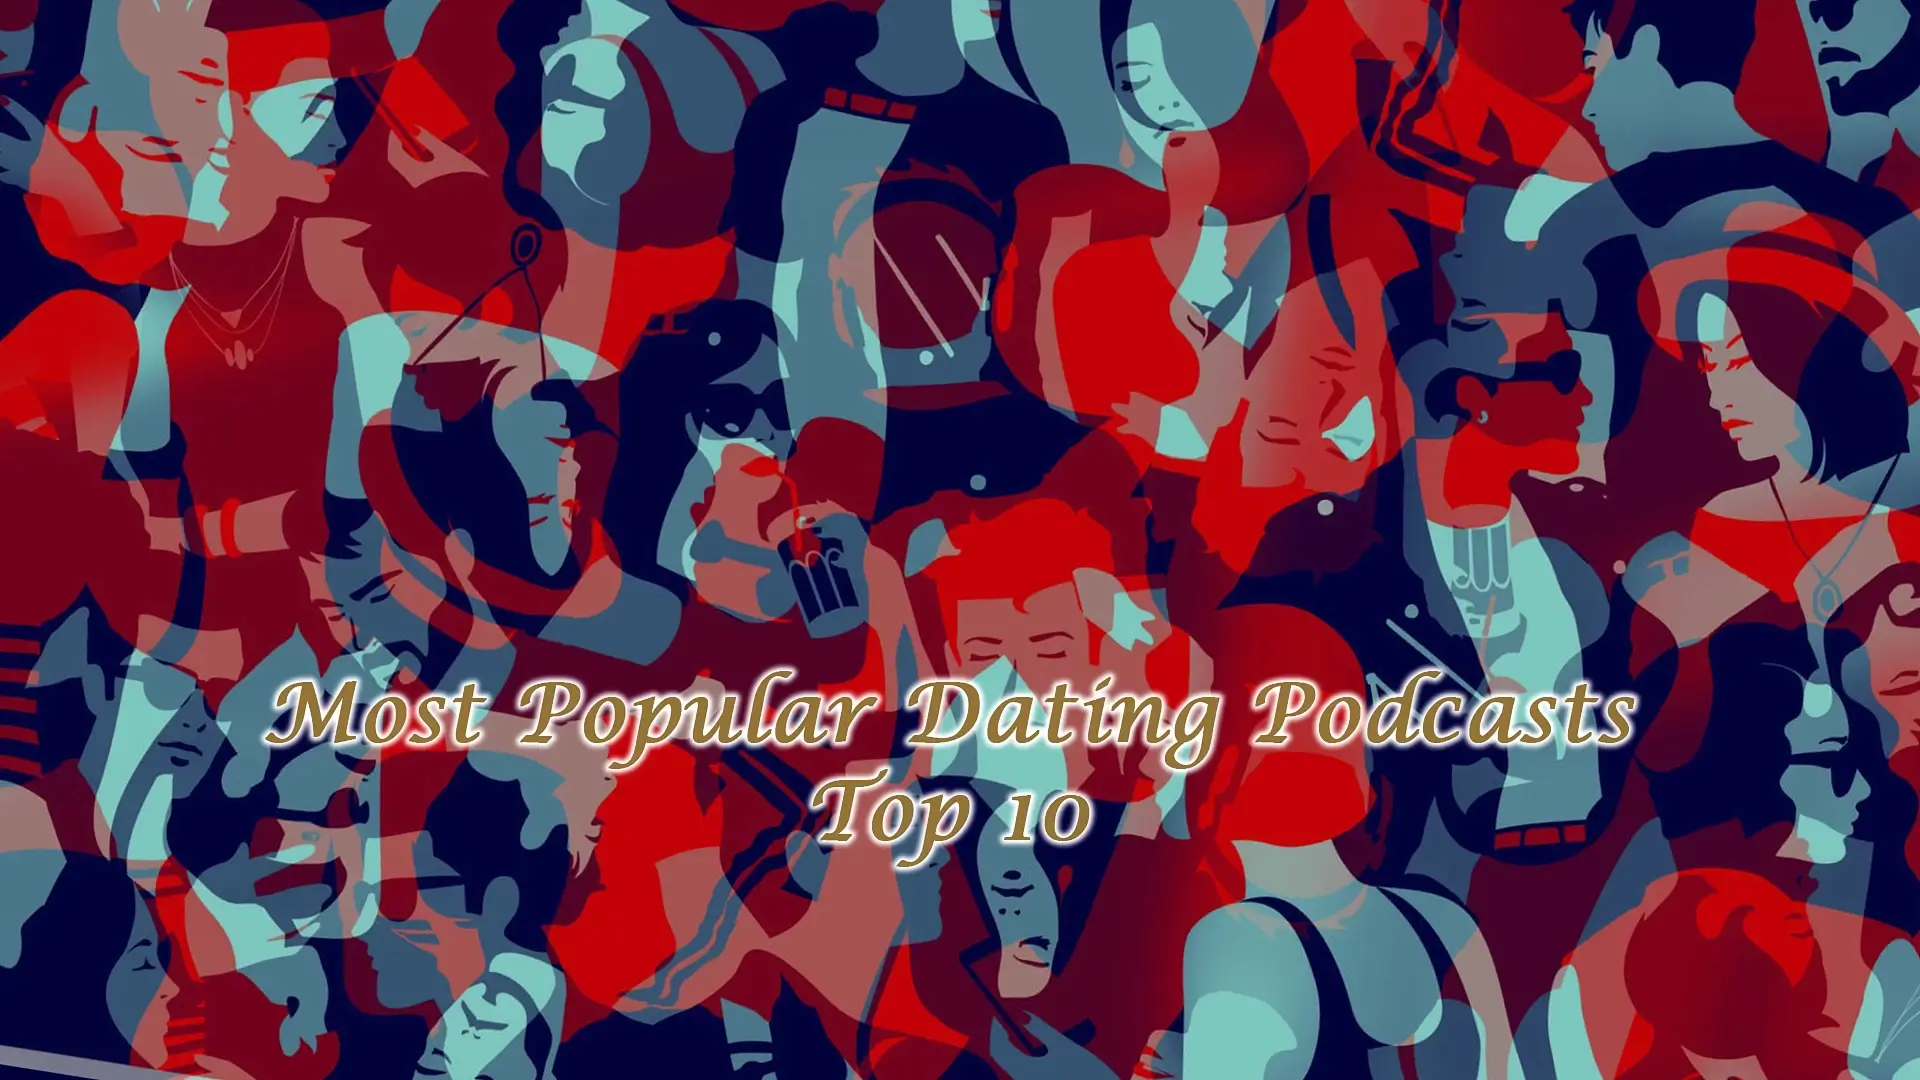 Top 10 Most Popular Dating Podcasts You Must Listen To